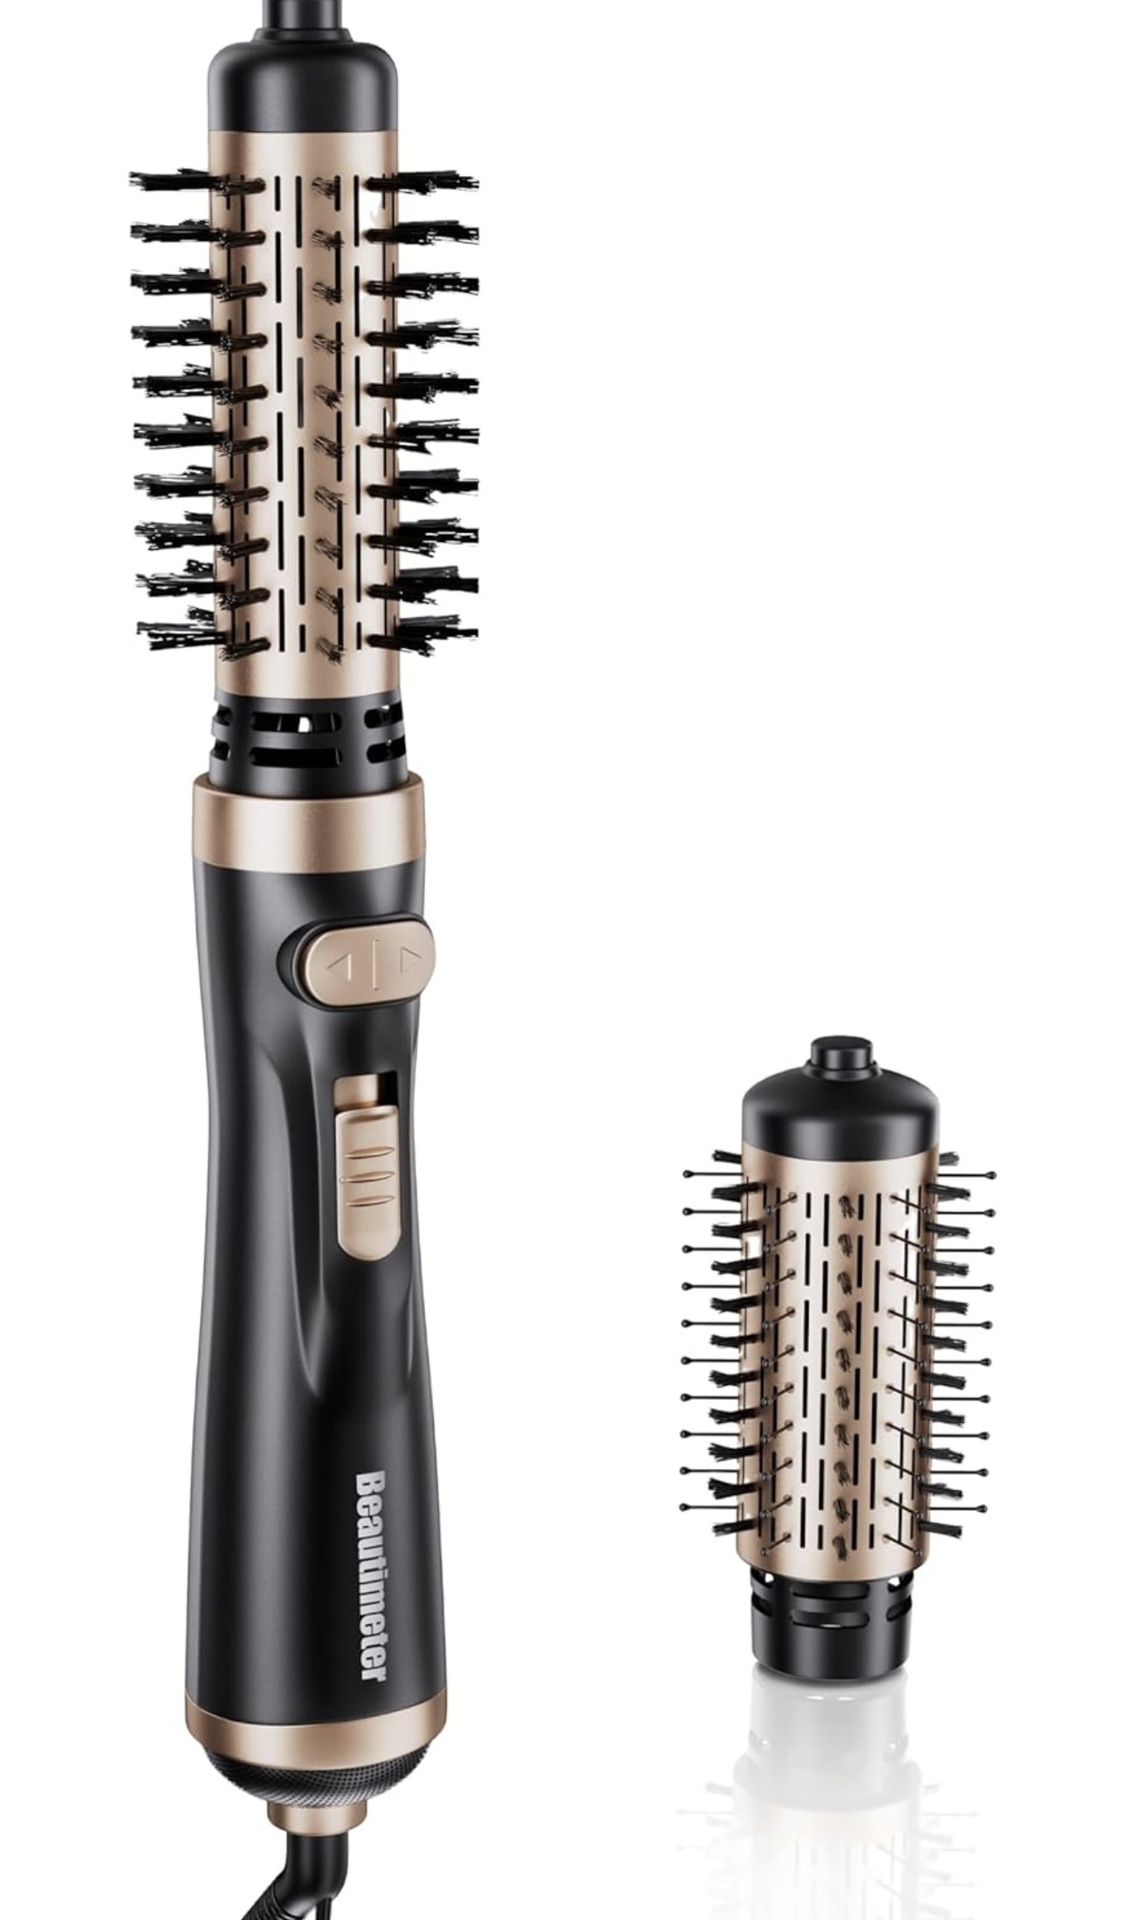 Beautimeter Auto Rotating Hair Dryer Brush, Hot Air Spin Brush Set with 2-Inch and 1.5-Inch Brushes, 3-in-1 Hot Air Curling Combo (Black & Gold)